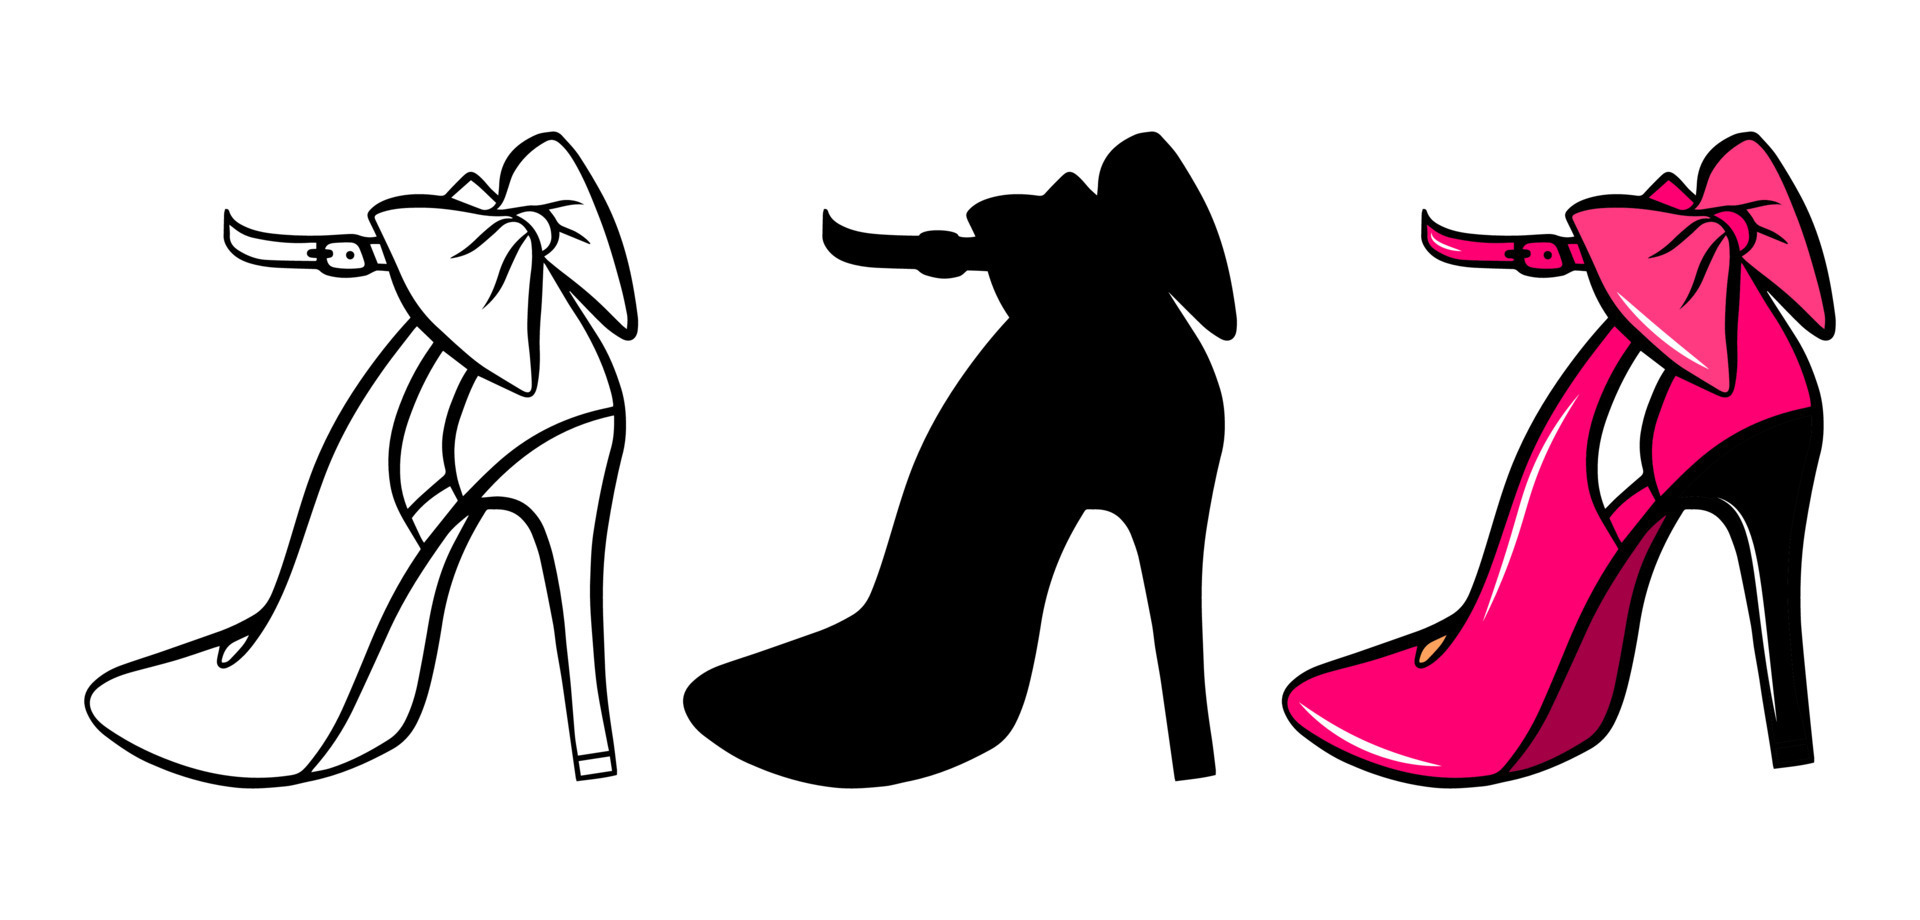 Woman shoes icon set isolated on white background. Colorful hand drawn ...